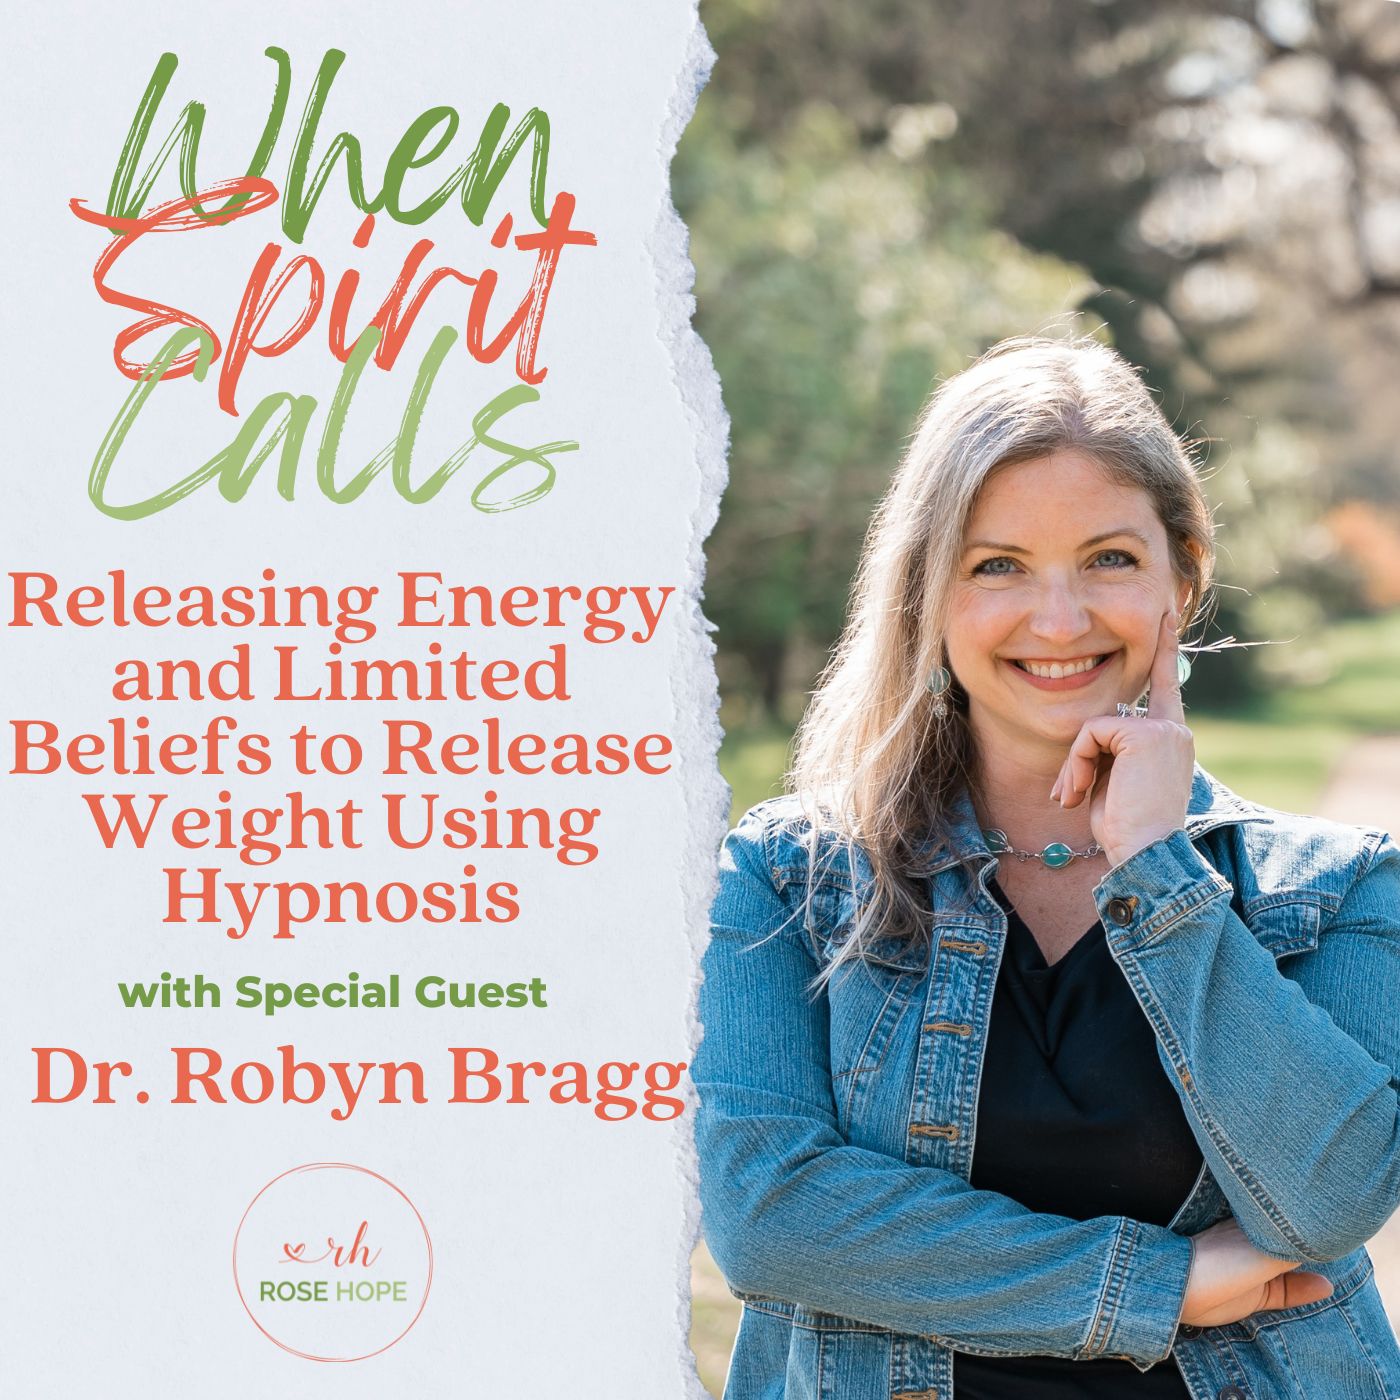 Releasing Energy and Limited Beliefs to Release Weight Using Hypnosis